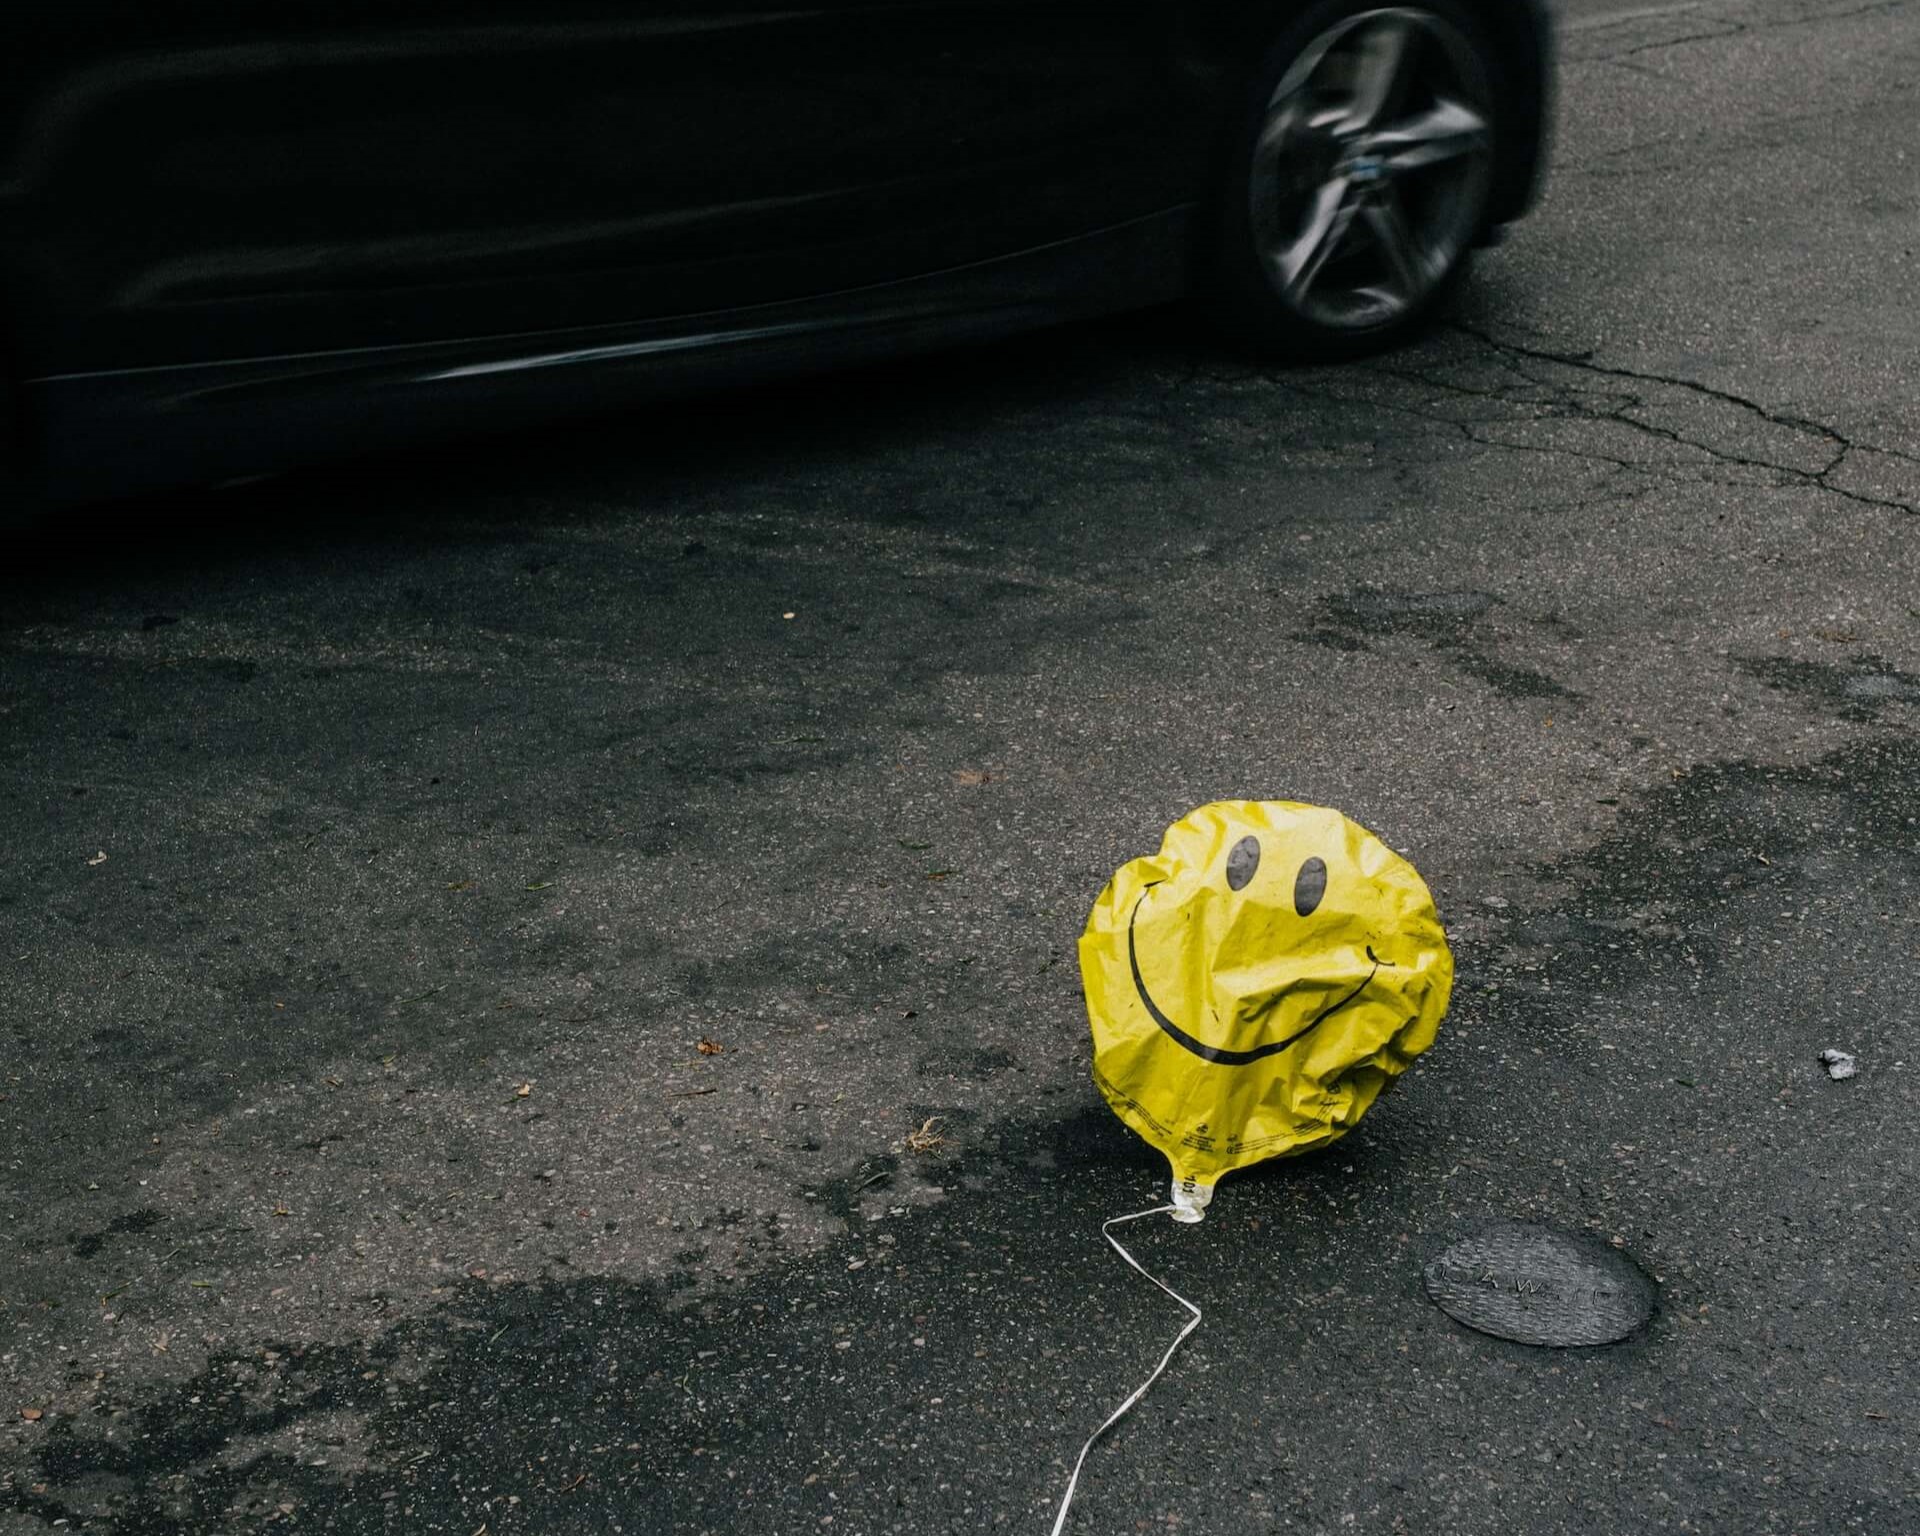 Deflated smiley face balloon in street